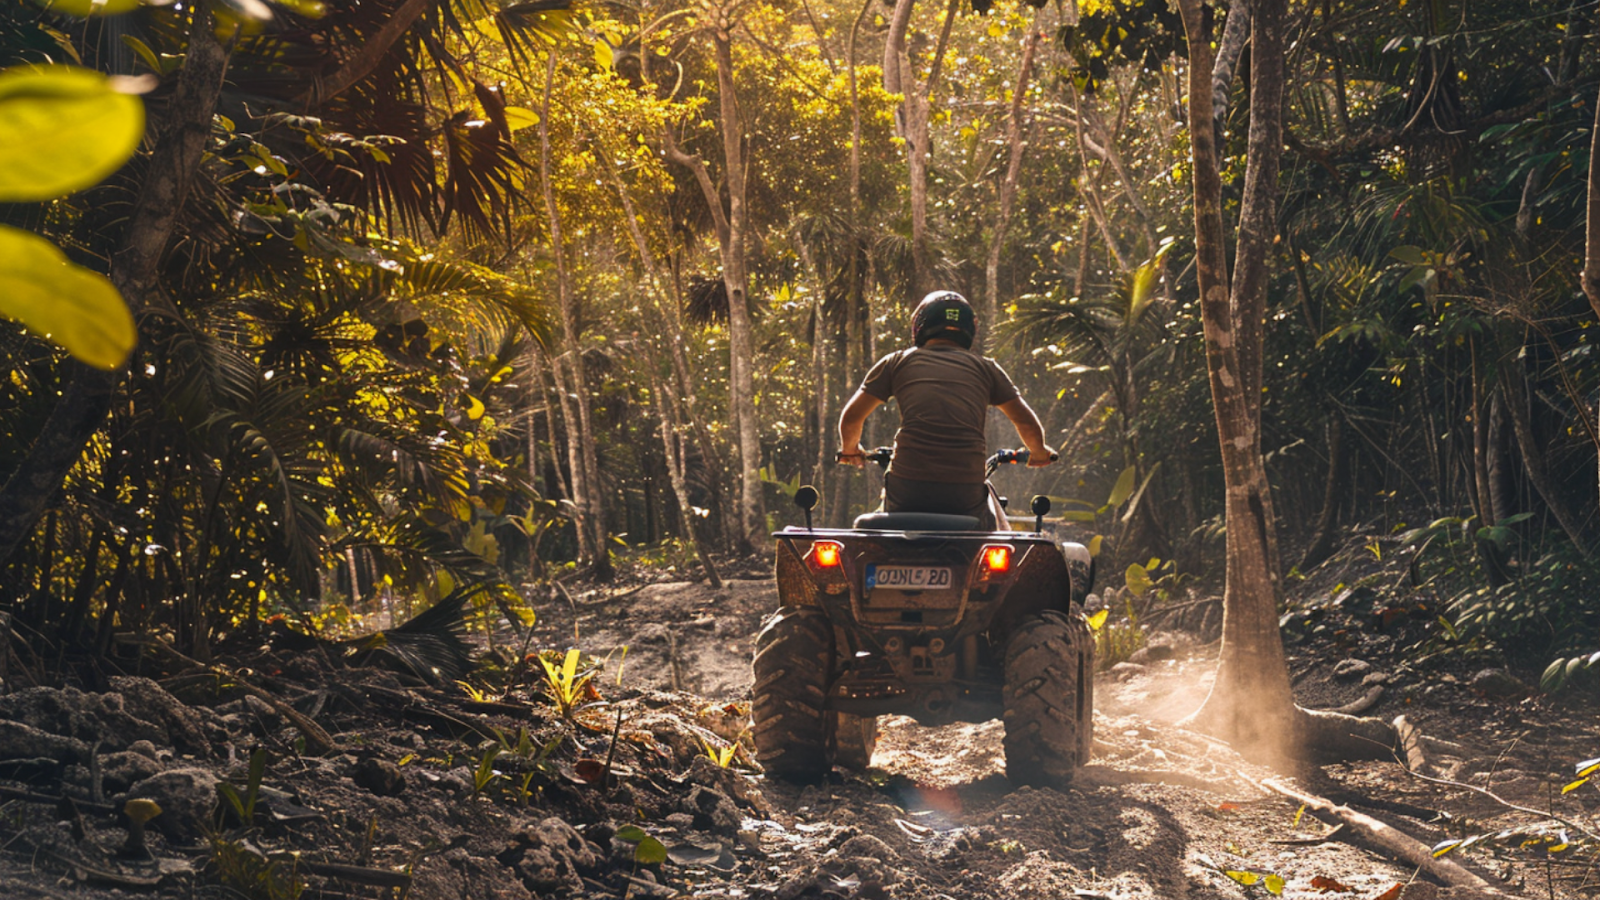 A man going on an ATV adventure exploring the lush jungles of Cancun